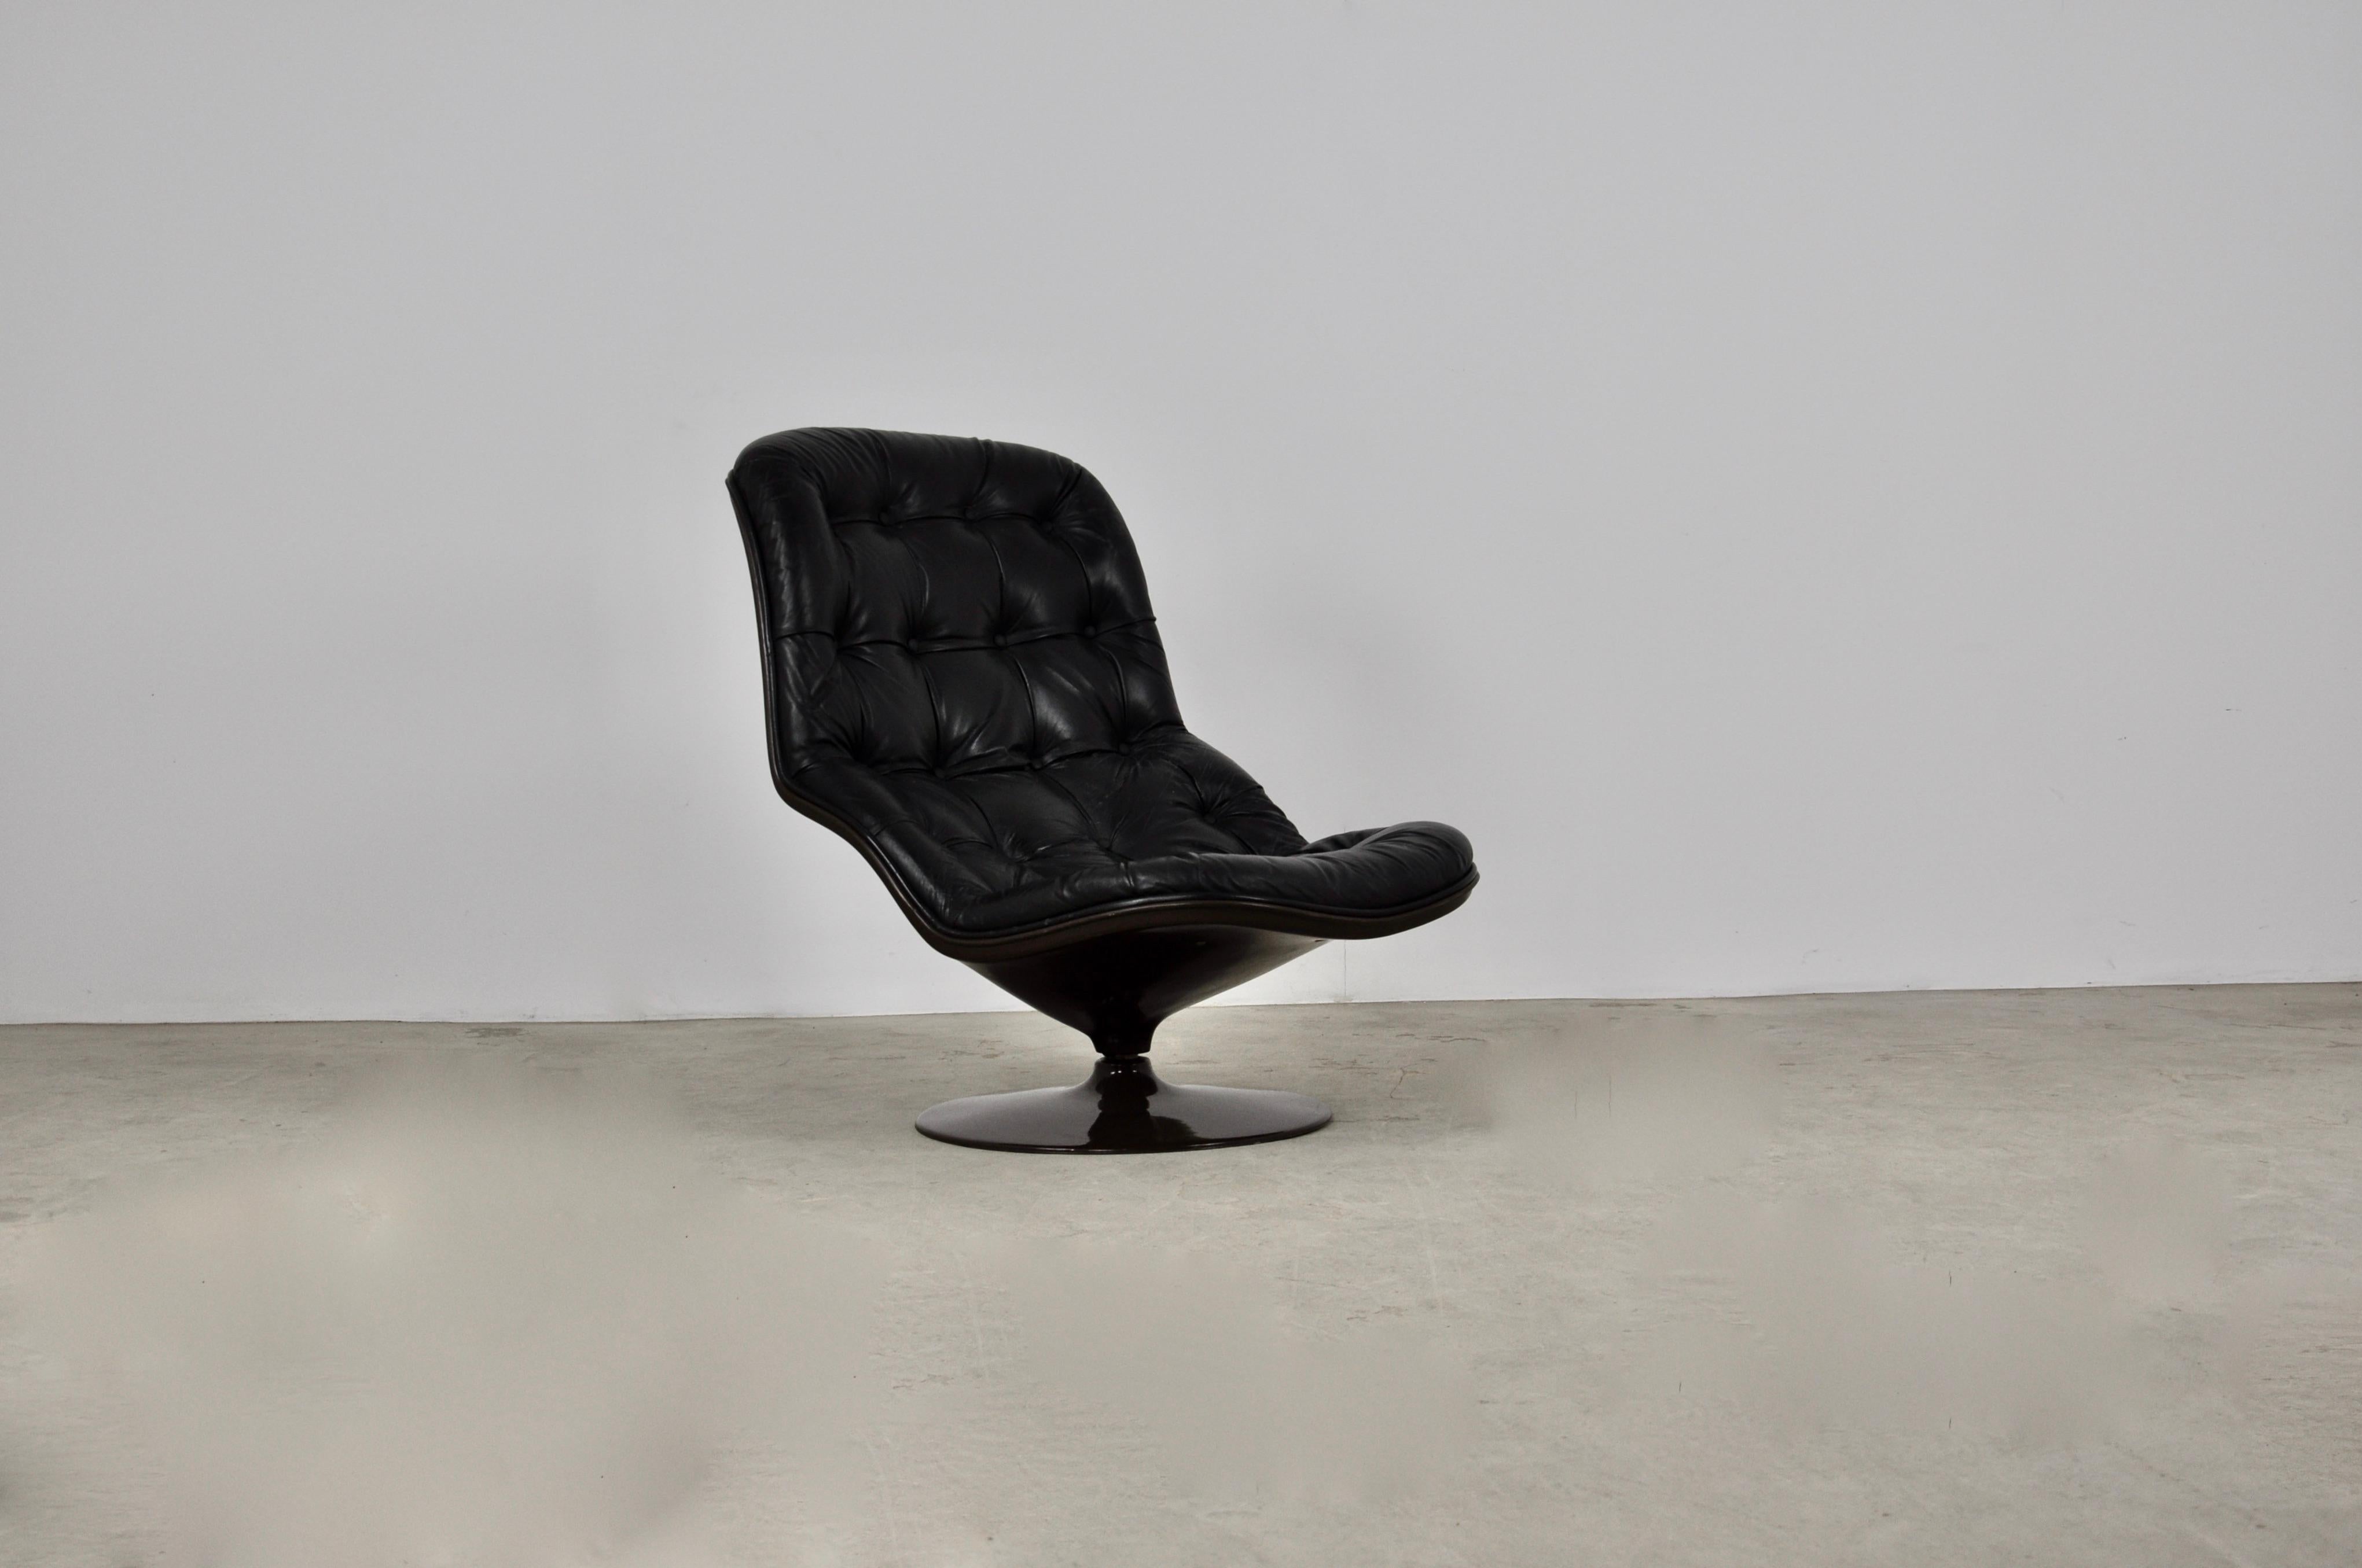 Fiberglass and leather armchair. Wear due to time and age of the chair. Measures: Seat height 38cm.